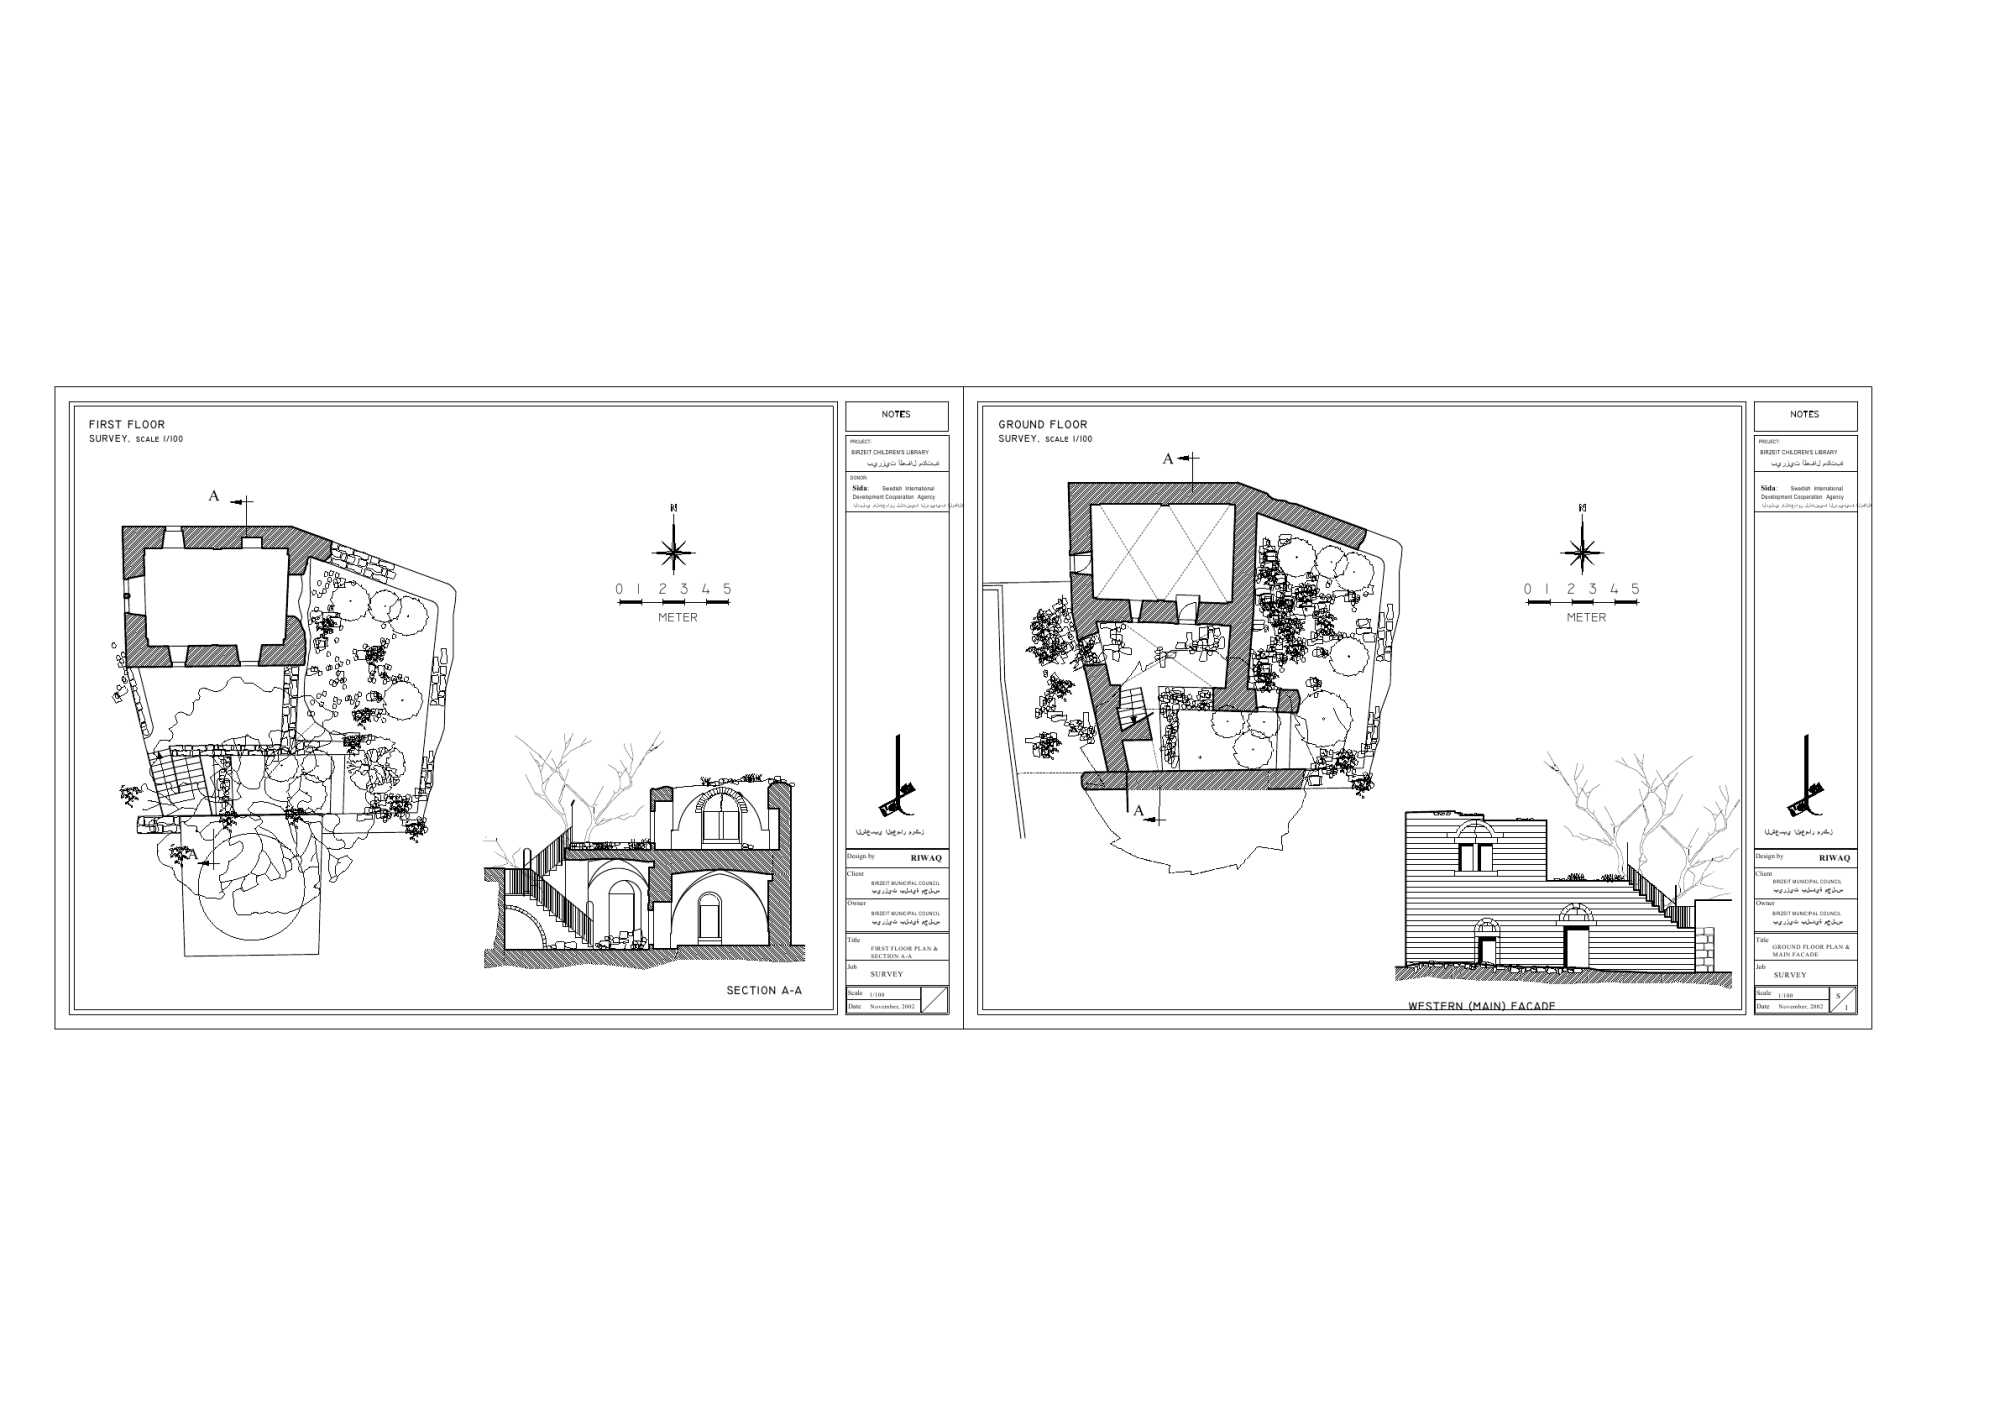 Children's Library Survey Drawings . CAD drawing converted to image file.